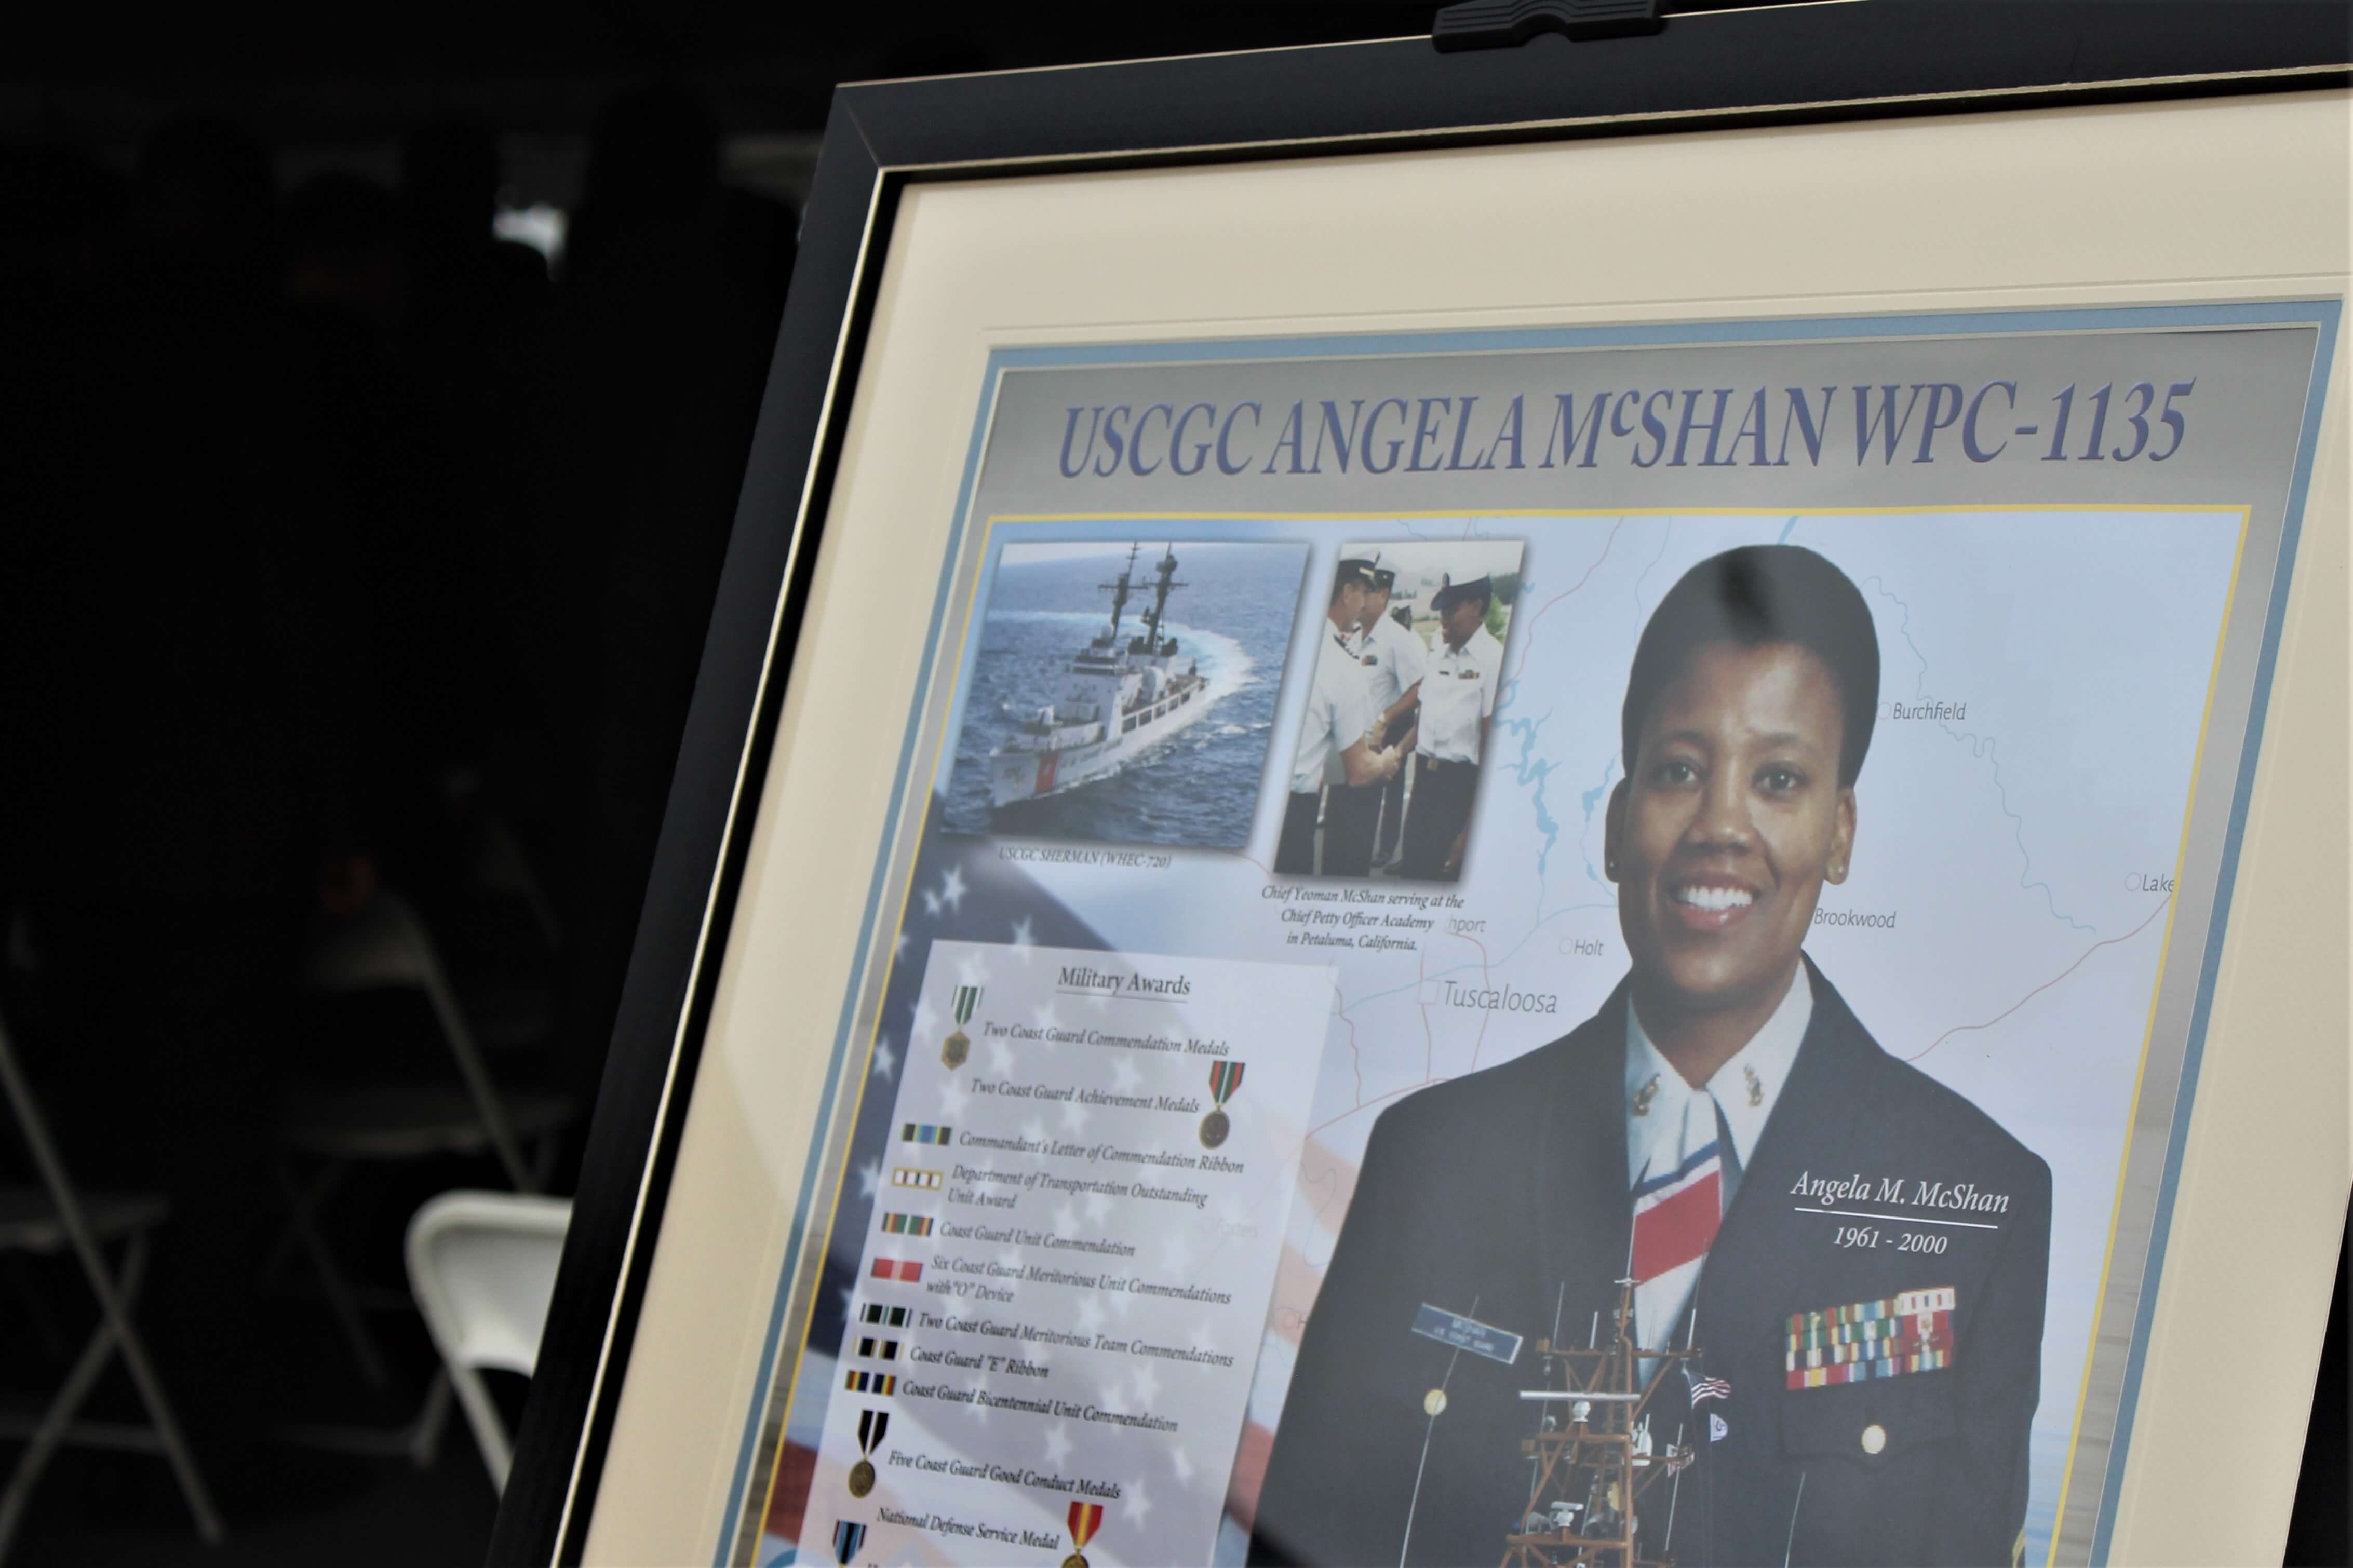 The U.S. Coast Guard's new ship was named in honor of Master Chief Angela M. McShan